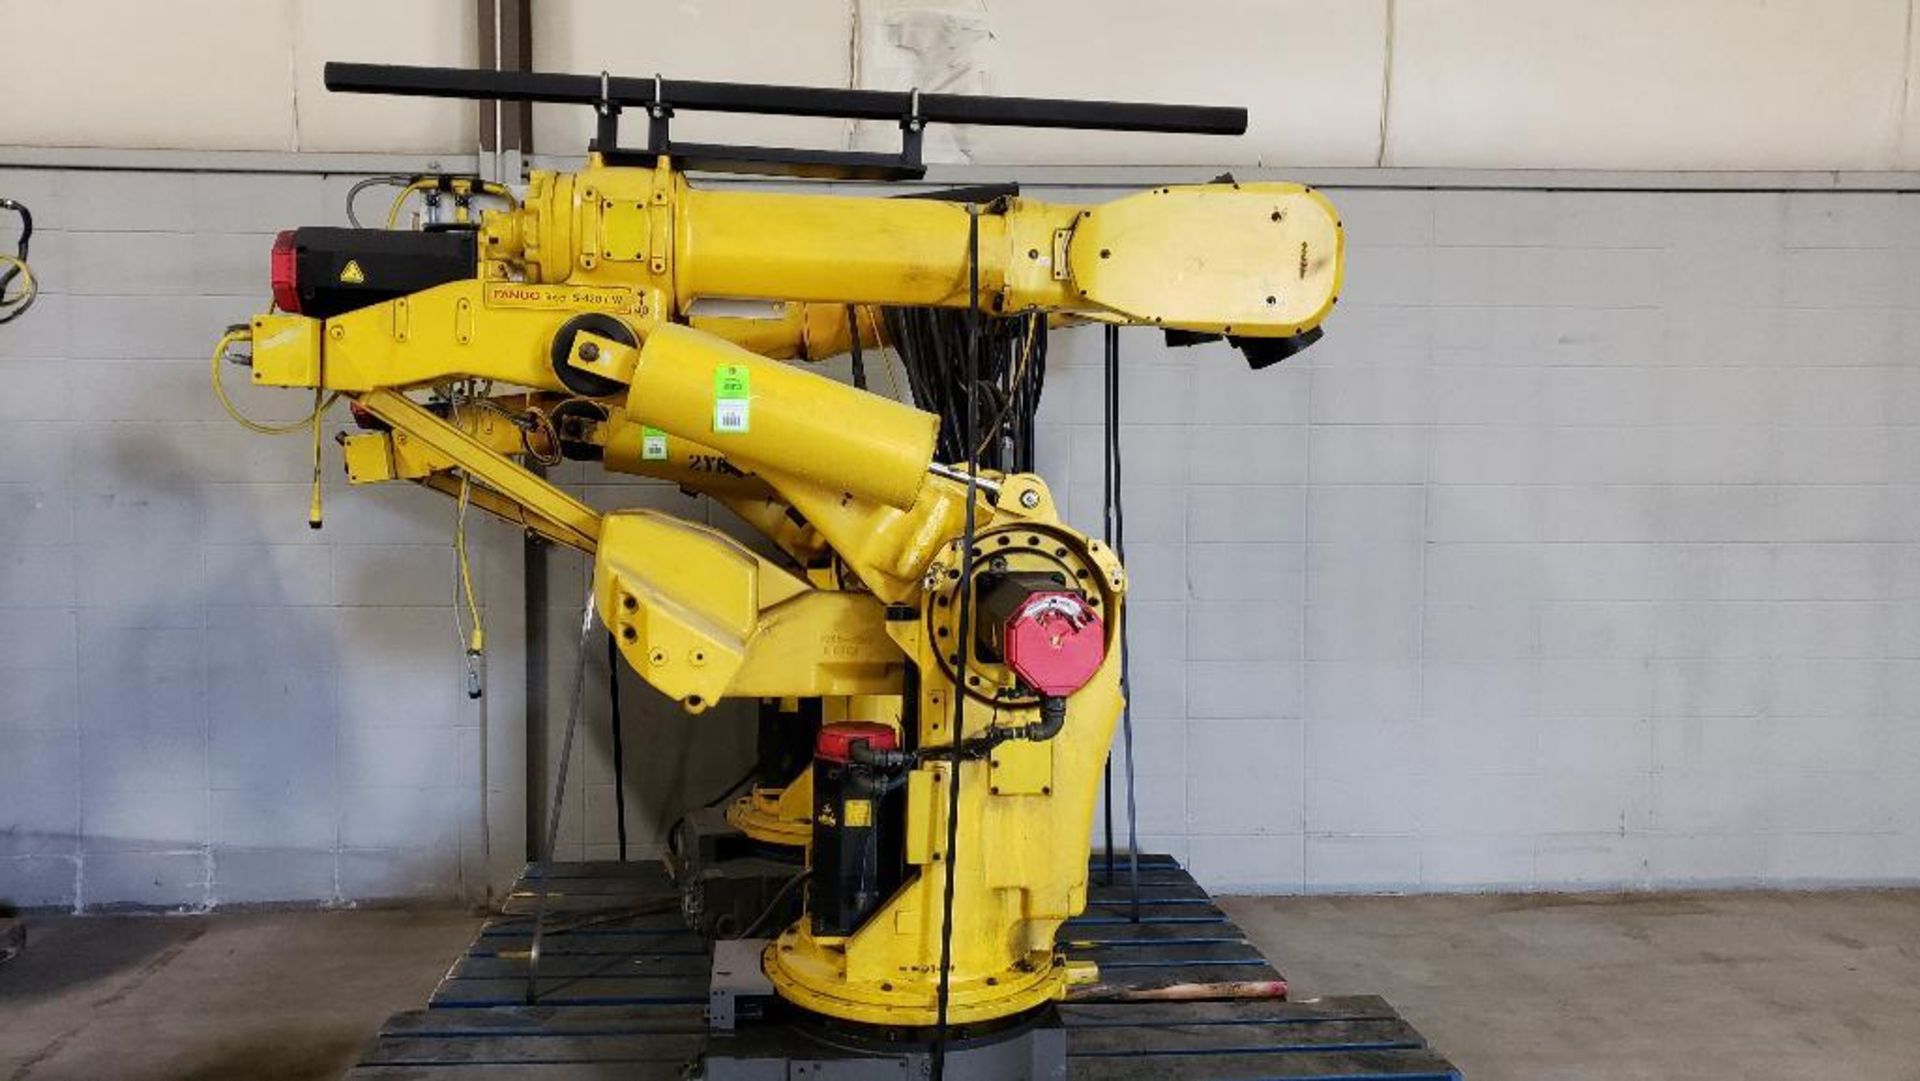 Fanuc S-420iW robot 6-axis arm.